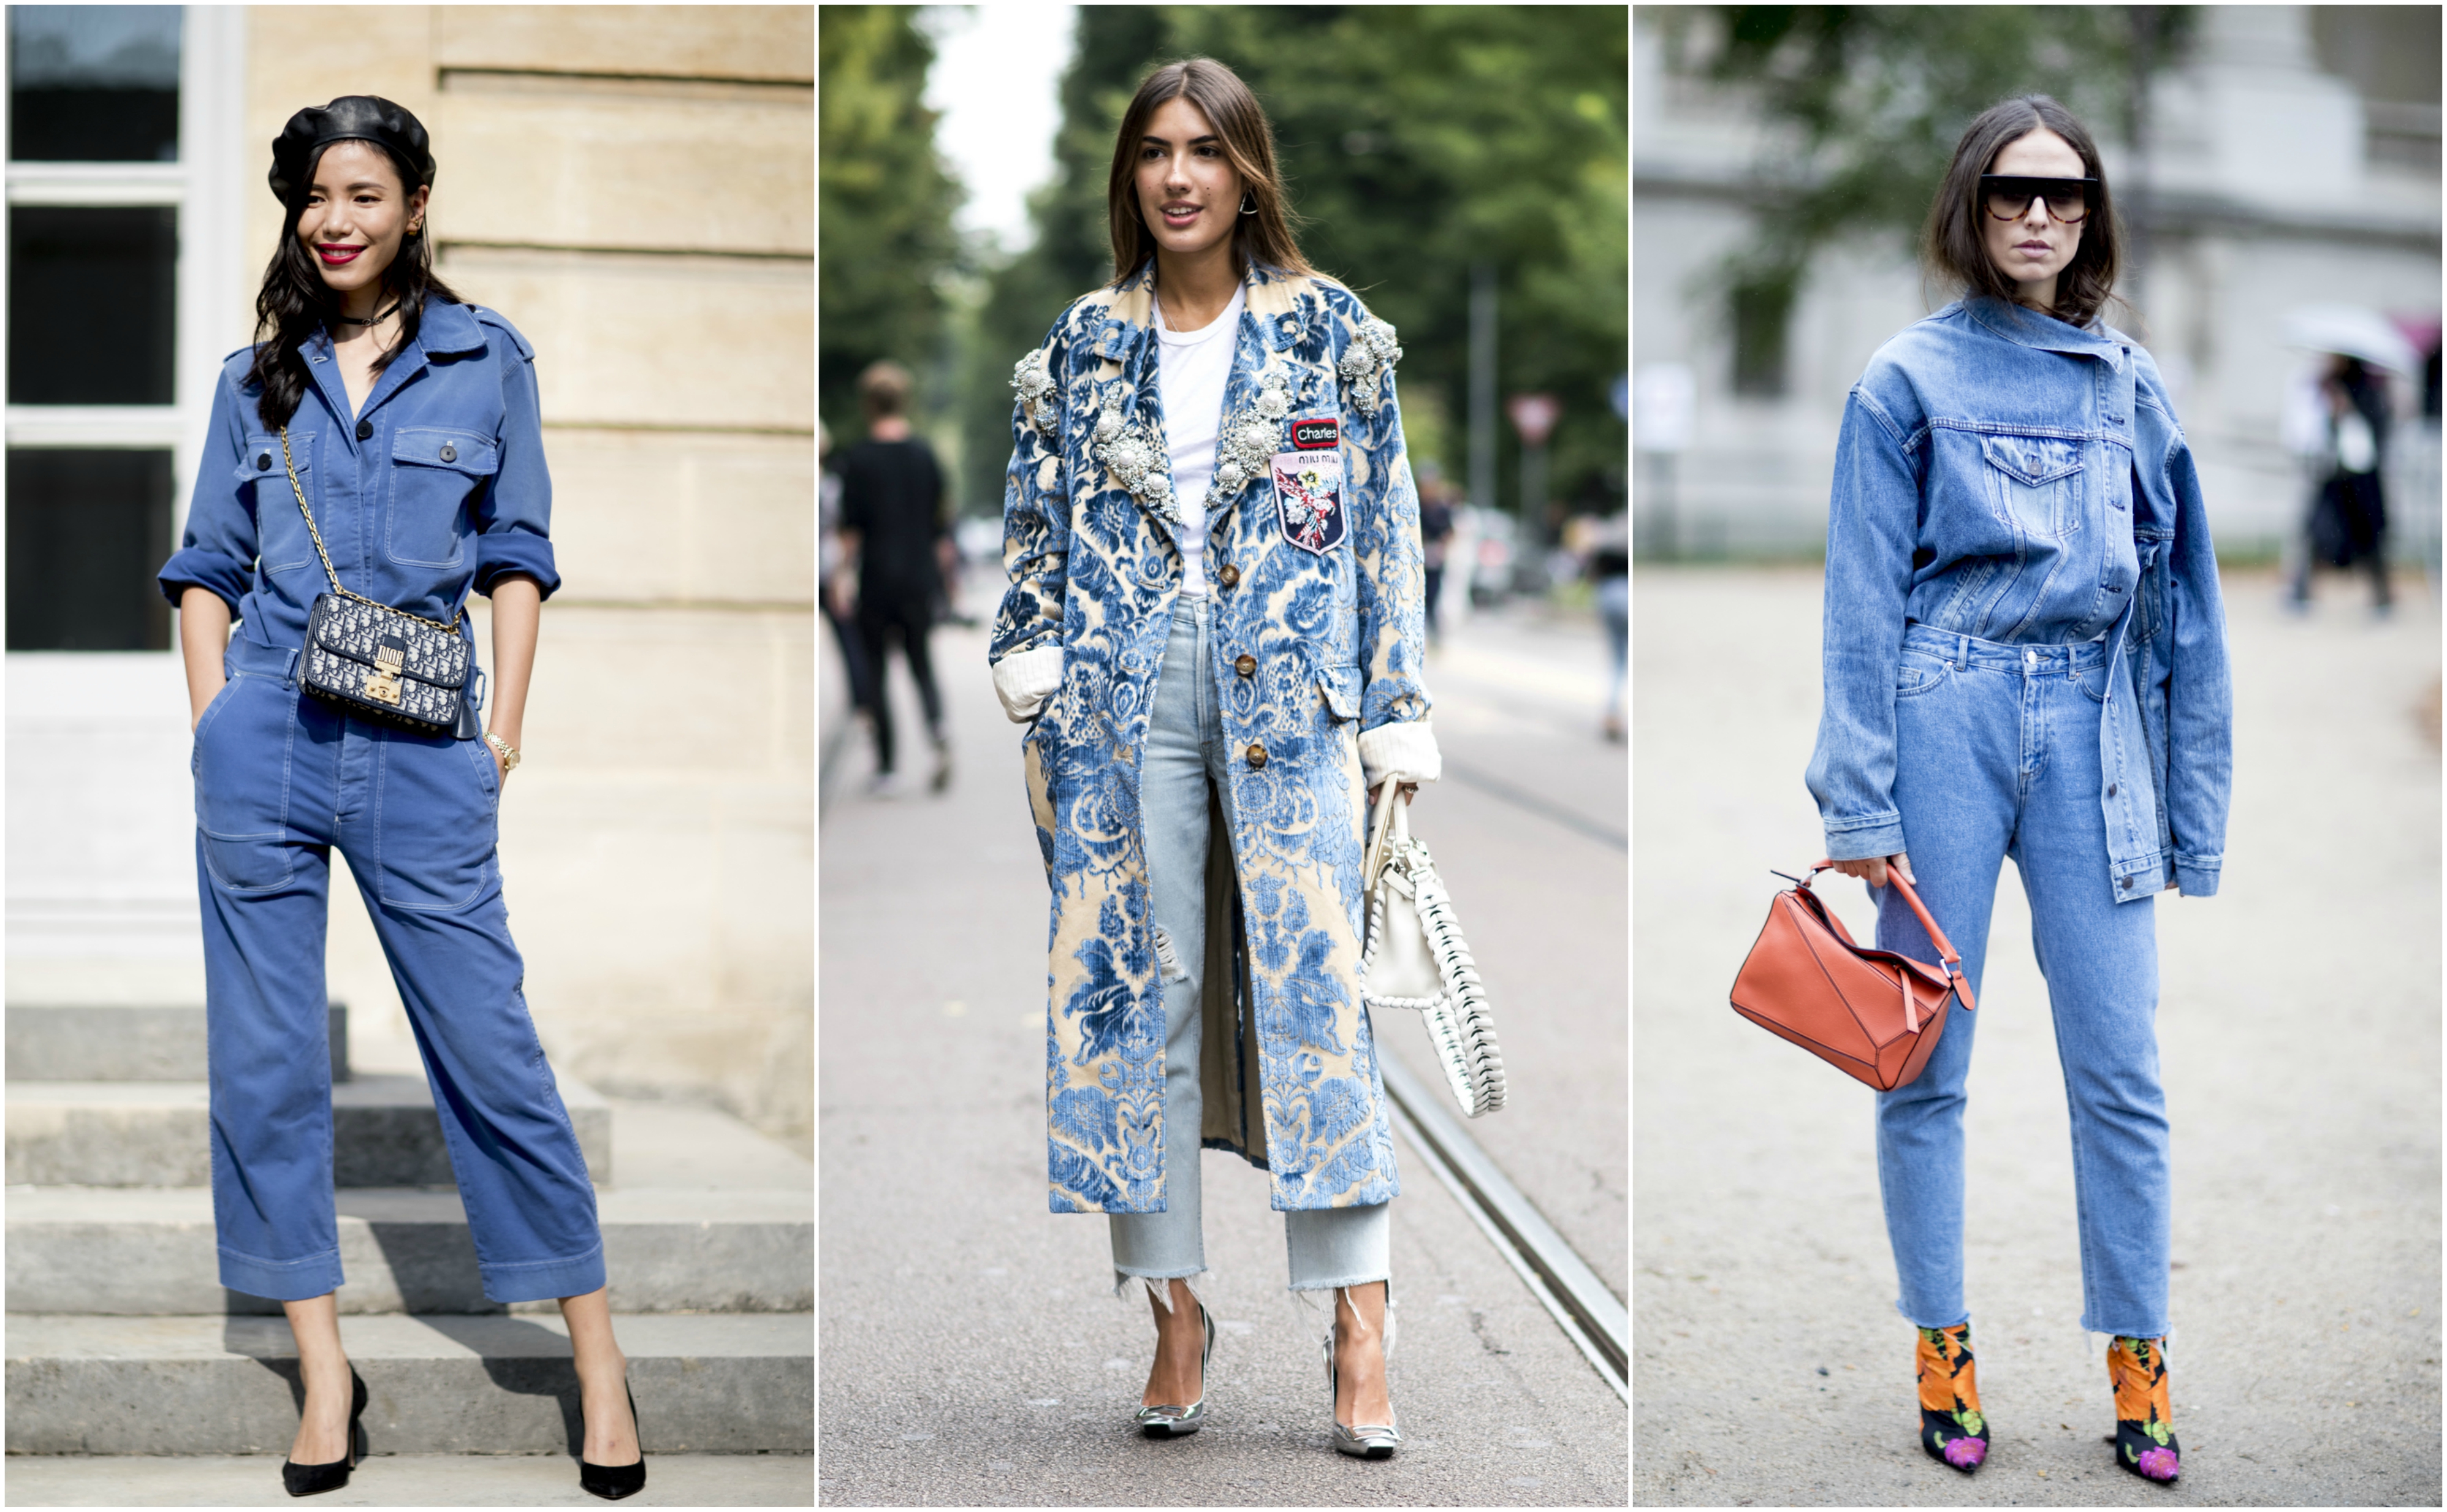 PAUSE Highlights: Is Double Denim Really a Fashion Faux Pas? – PAUSE Online  | Men's Fashion, Street Style, Fashion News & Streetwear